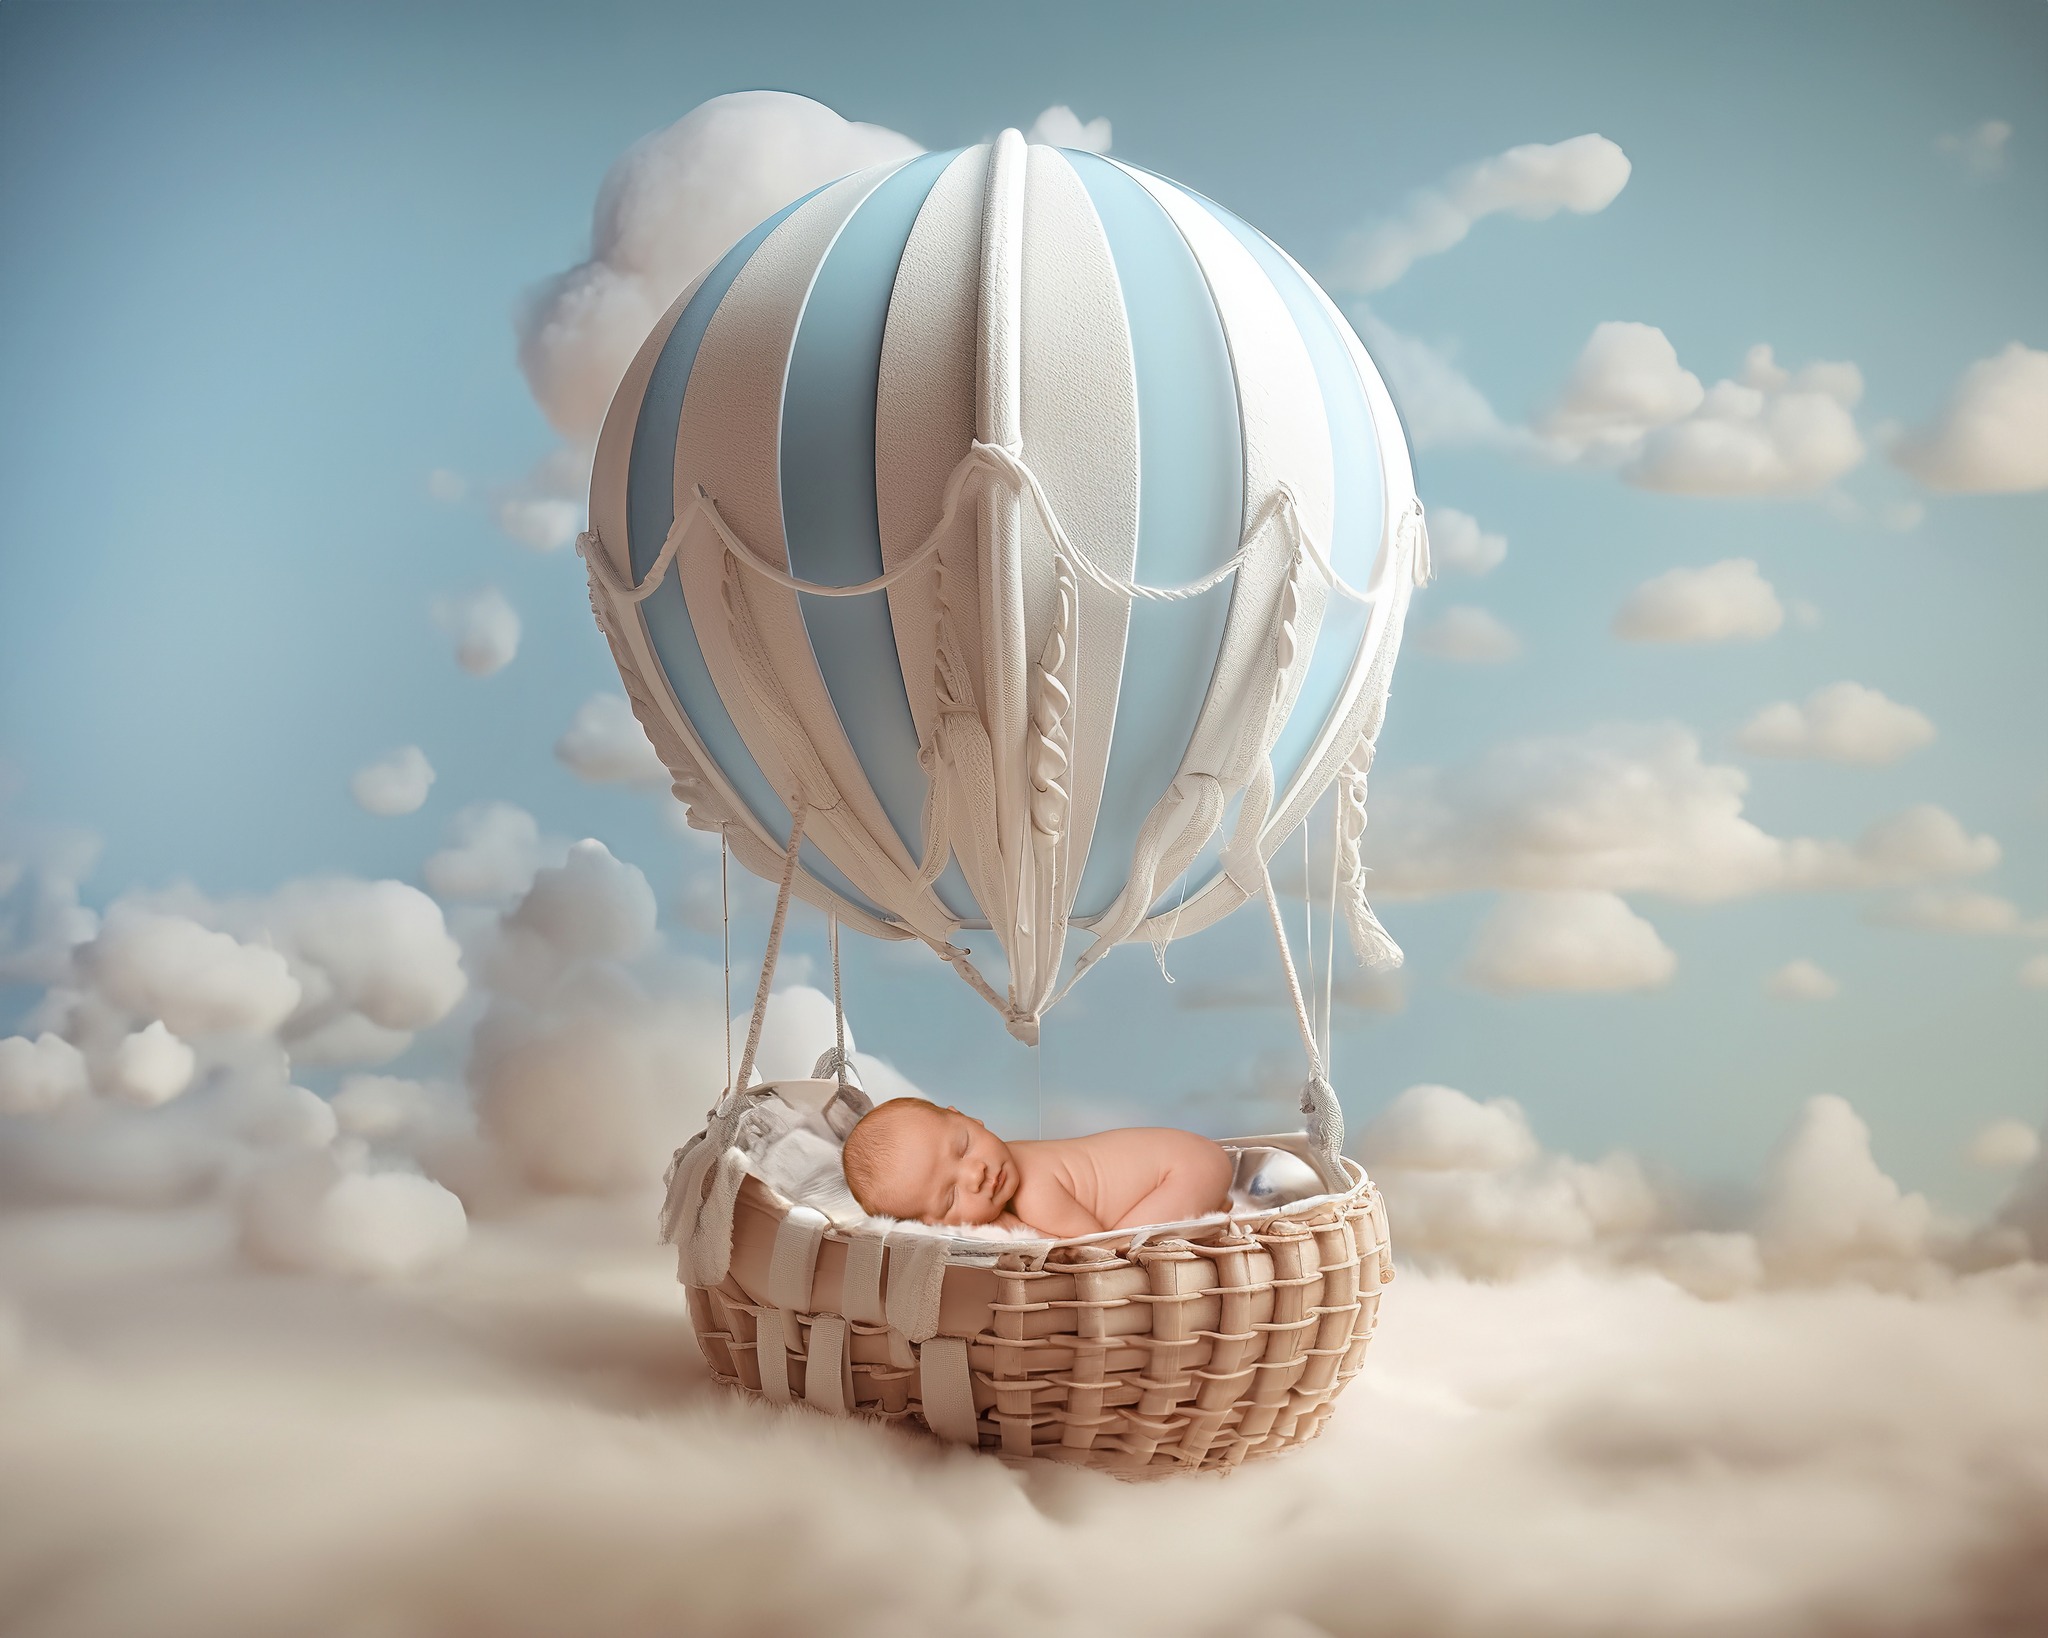 After his denver lactation consultants appointment here is a sleeping baby on a composite hot air balloon.